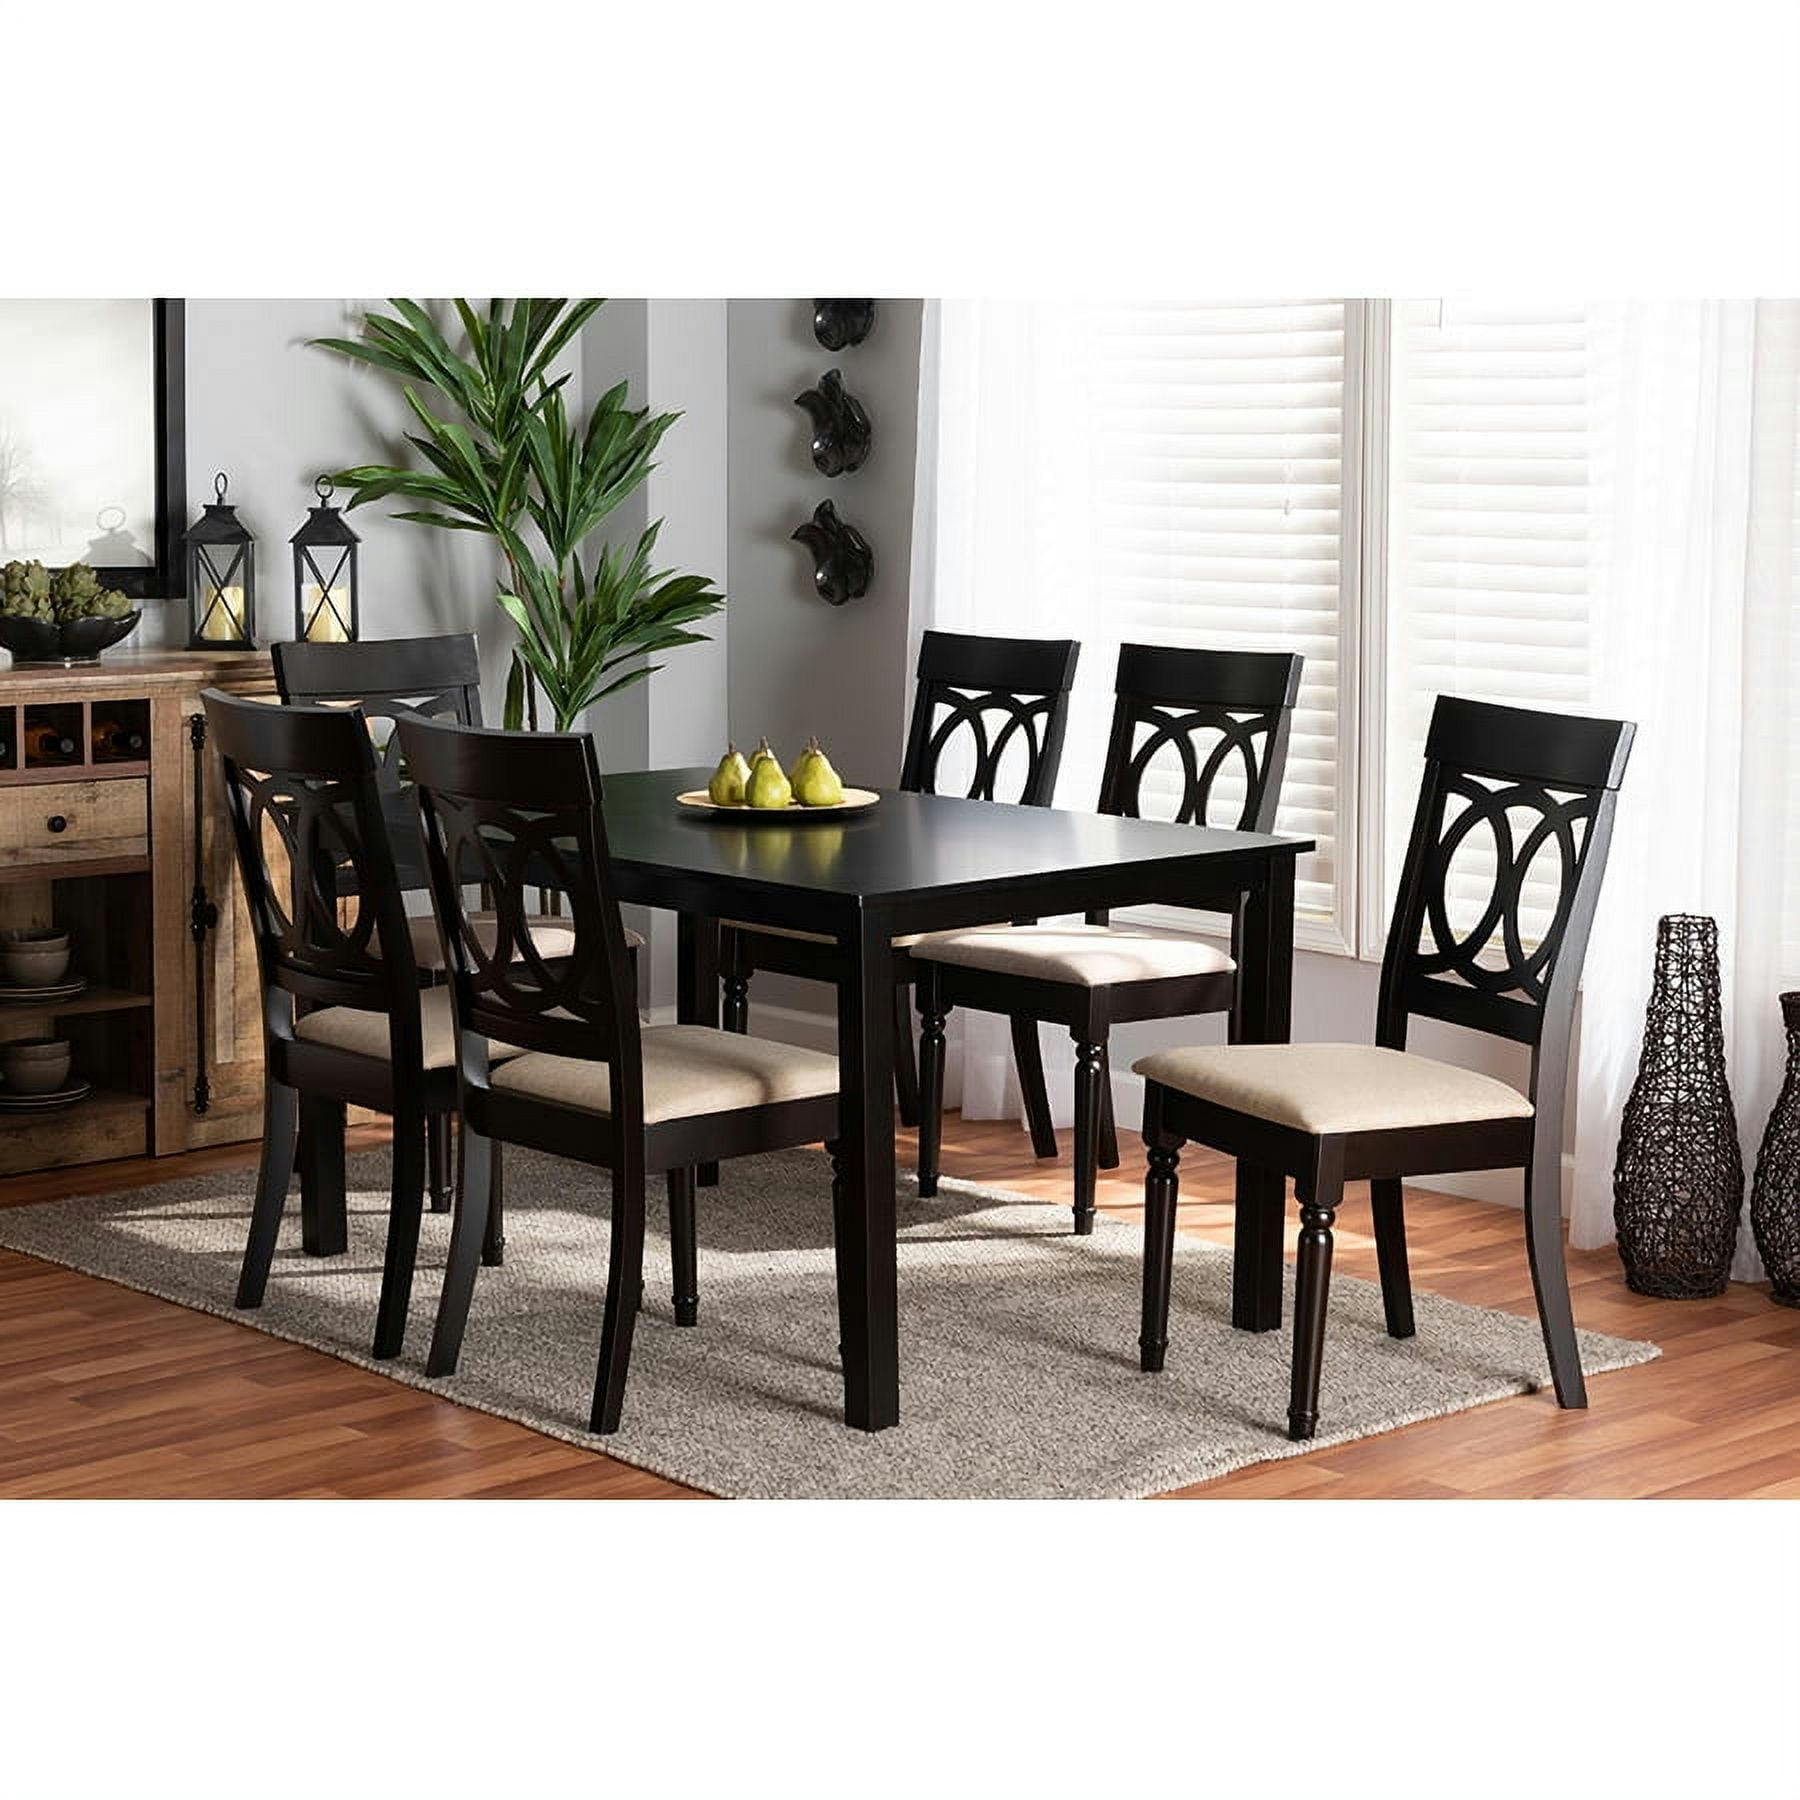 Lucie Sand Fabric and Dark Brown Wood 7-Piece Dining Set